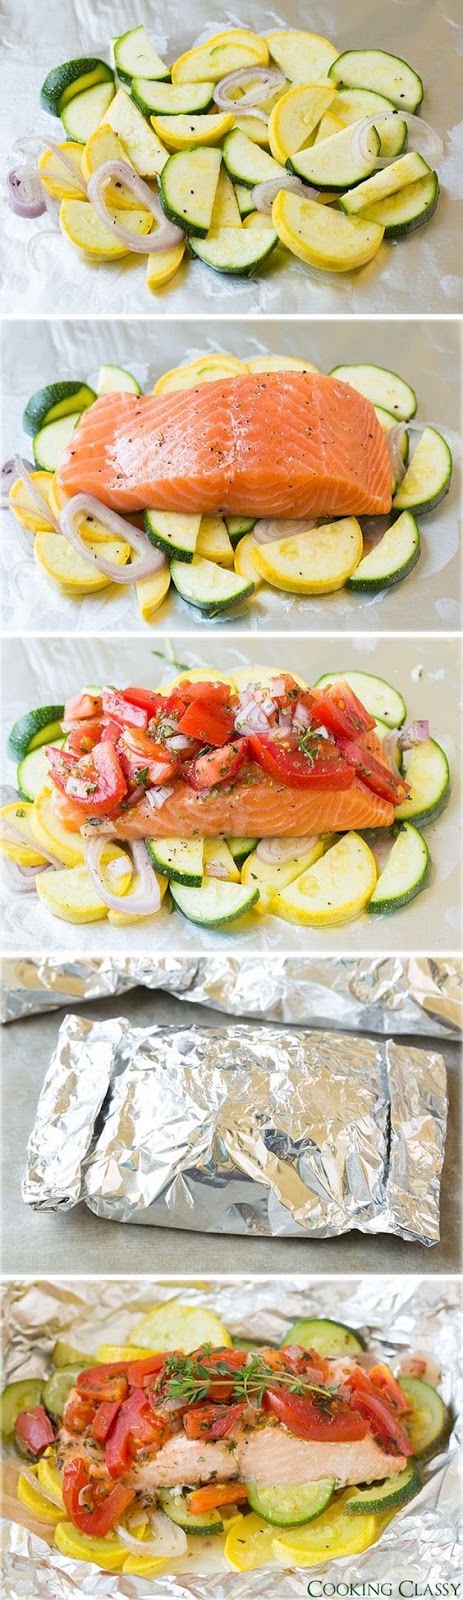 Salmon and Summer Veggies in Foil - so easy to make, perfectly flavorful and clean up is a breeze! Whole family LOVED this salmon!